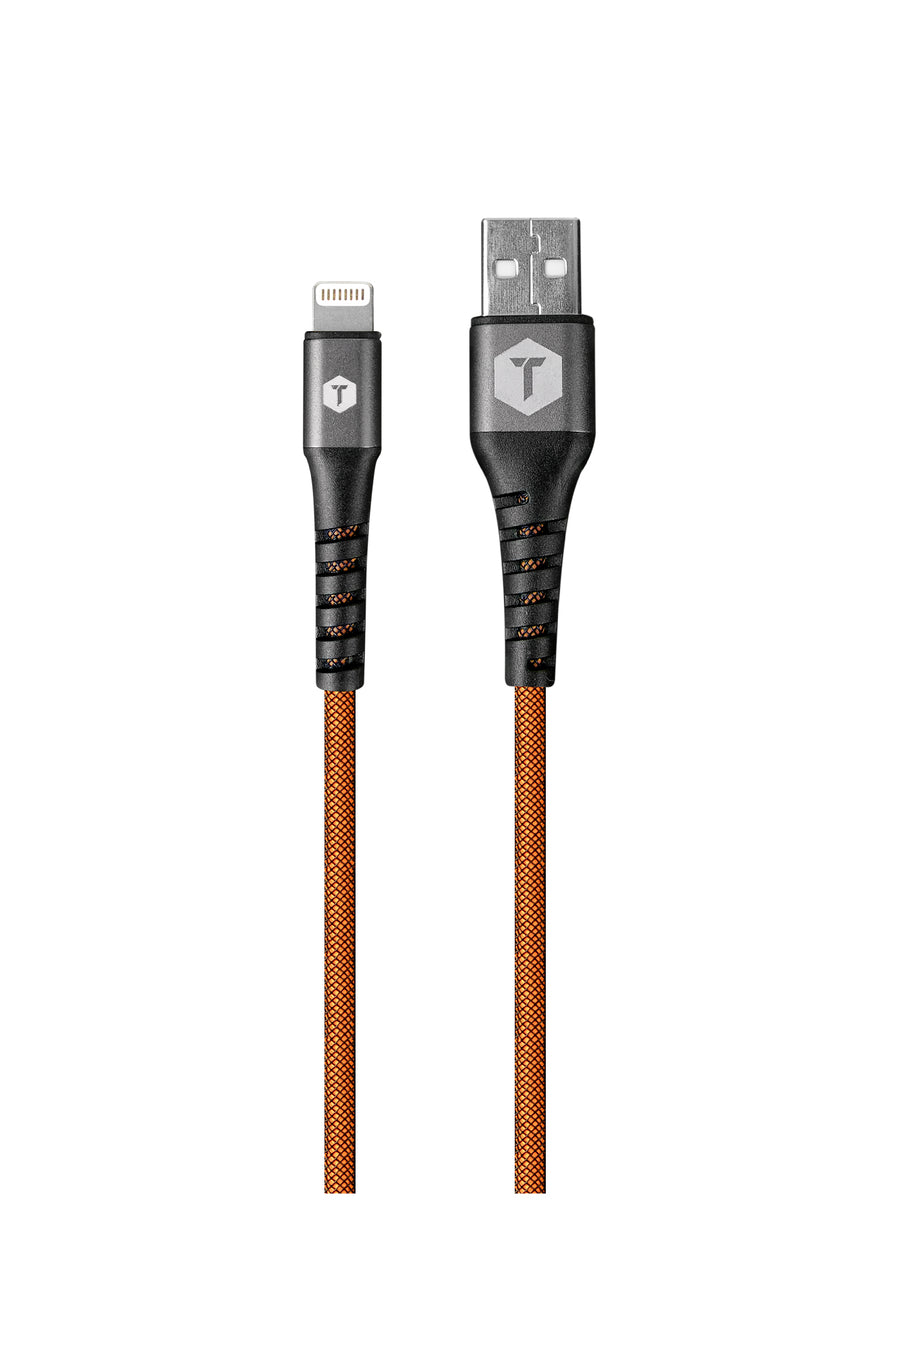 8 Ft. PRO Armor Weave Cable with Slim Tip with Lightning Connector